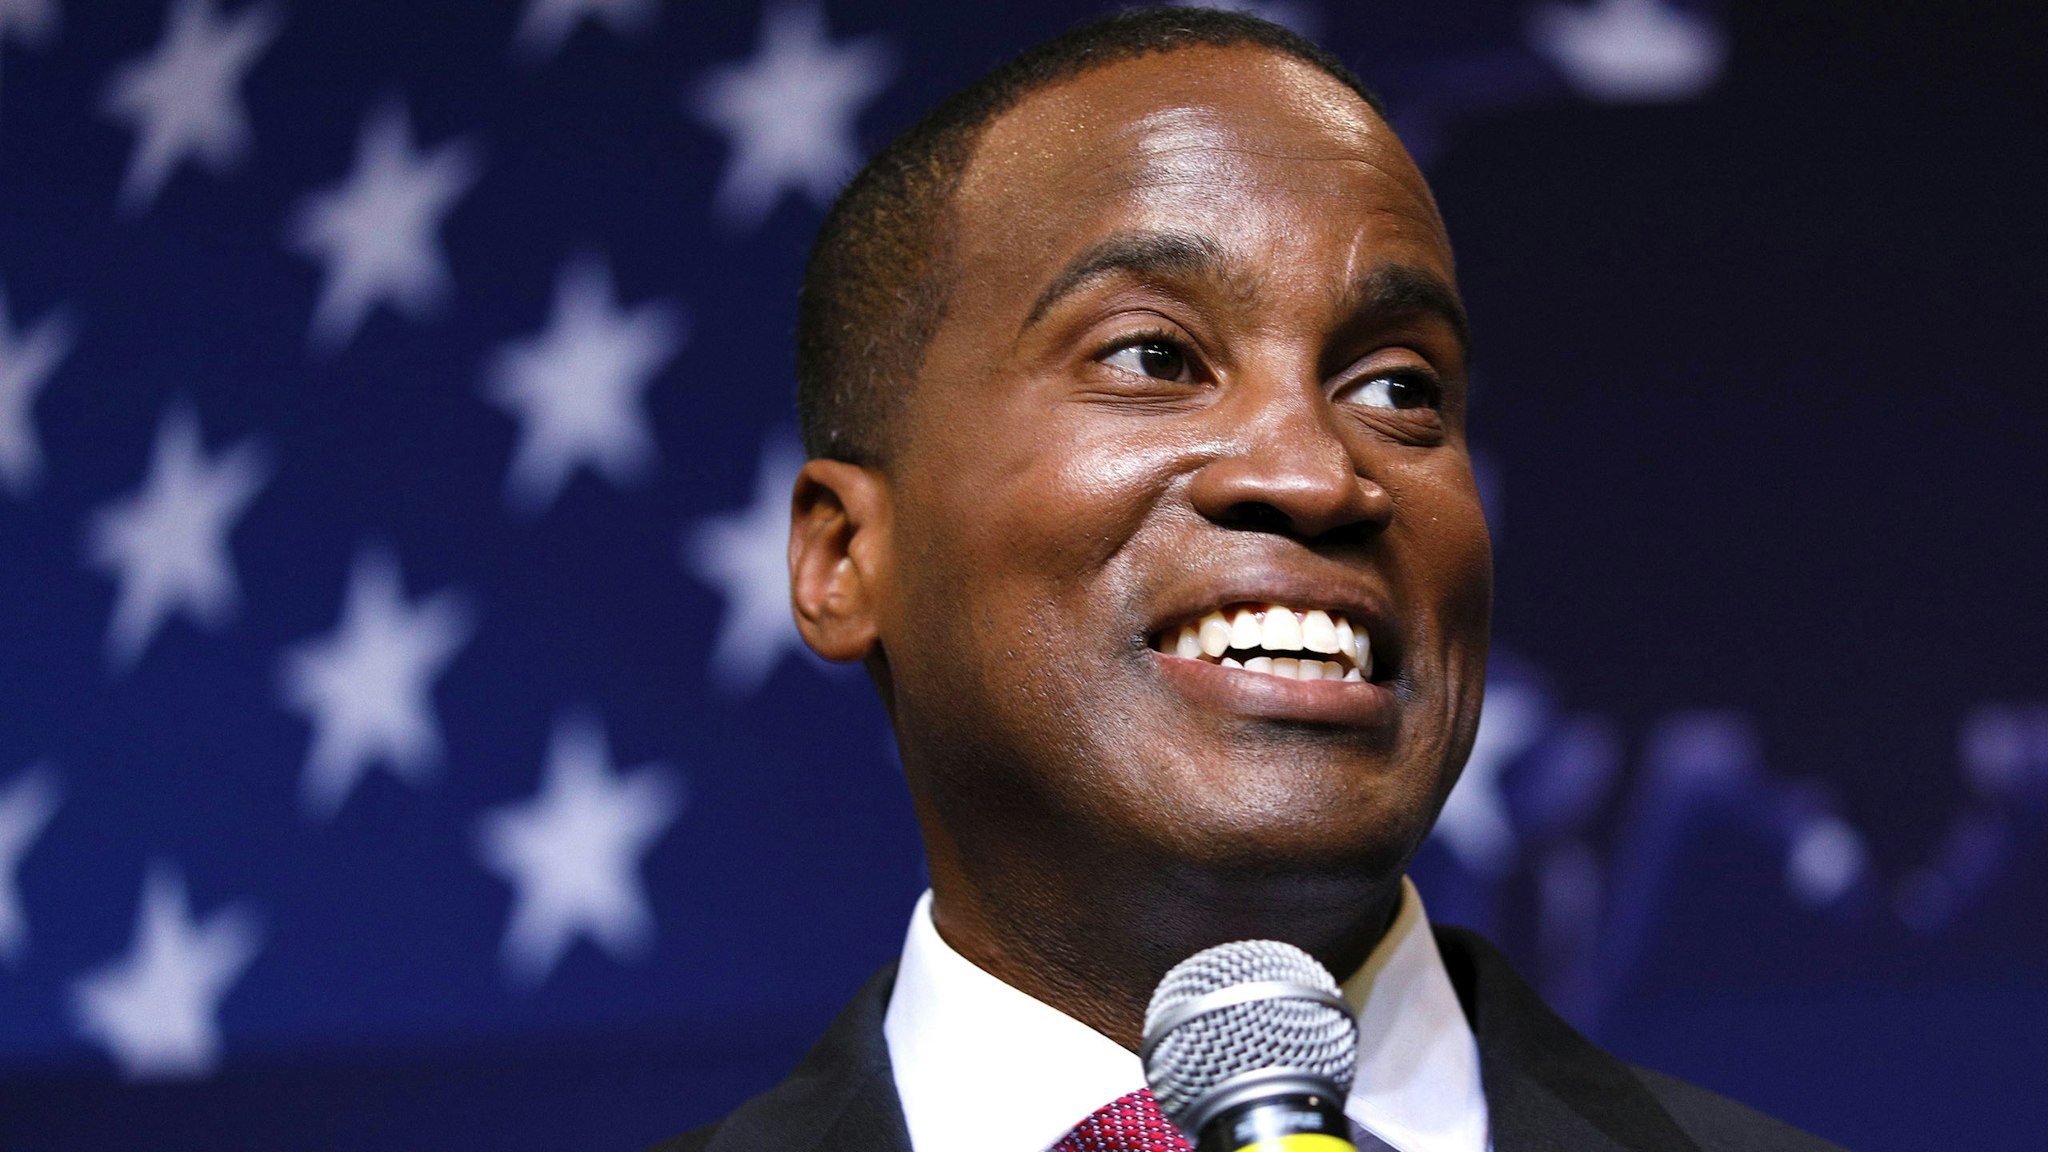 DETROIT, MI - AUGUST 7: John James, Michigan GOP Senate candidate, speaks at an election night event after winning his primary election at his business, James Group International August 7, 2018 in Detroit, Michigan. James, who has President Donald Trump's endorsement, will face Democrat incumbent Senator Debbie Stabenow (D-MI) in November.